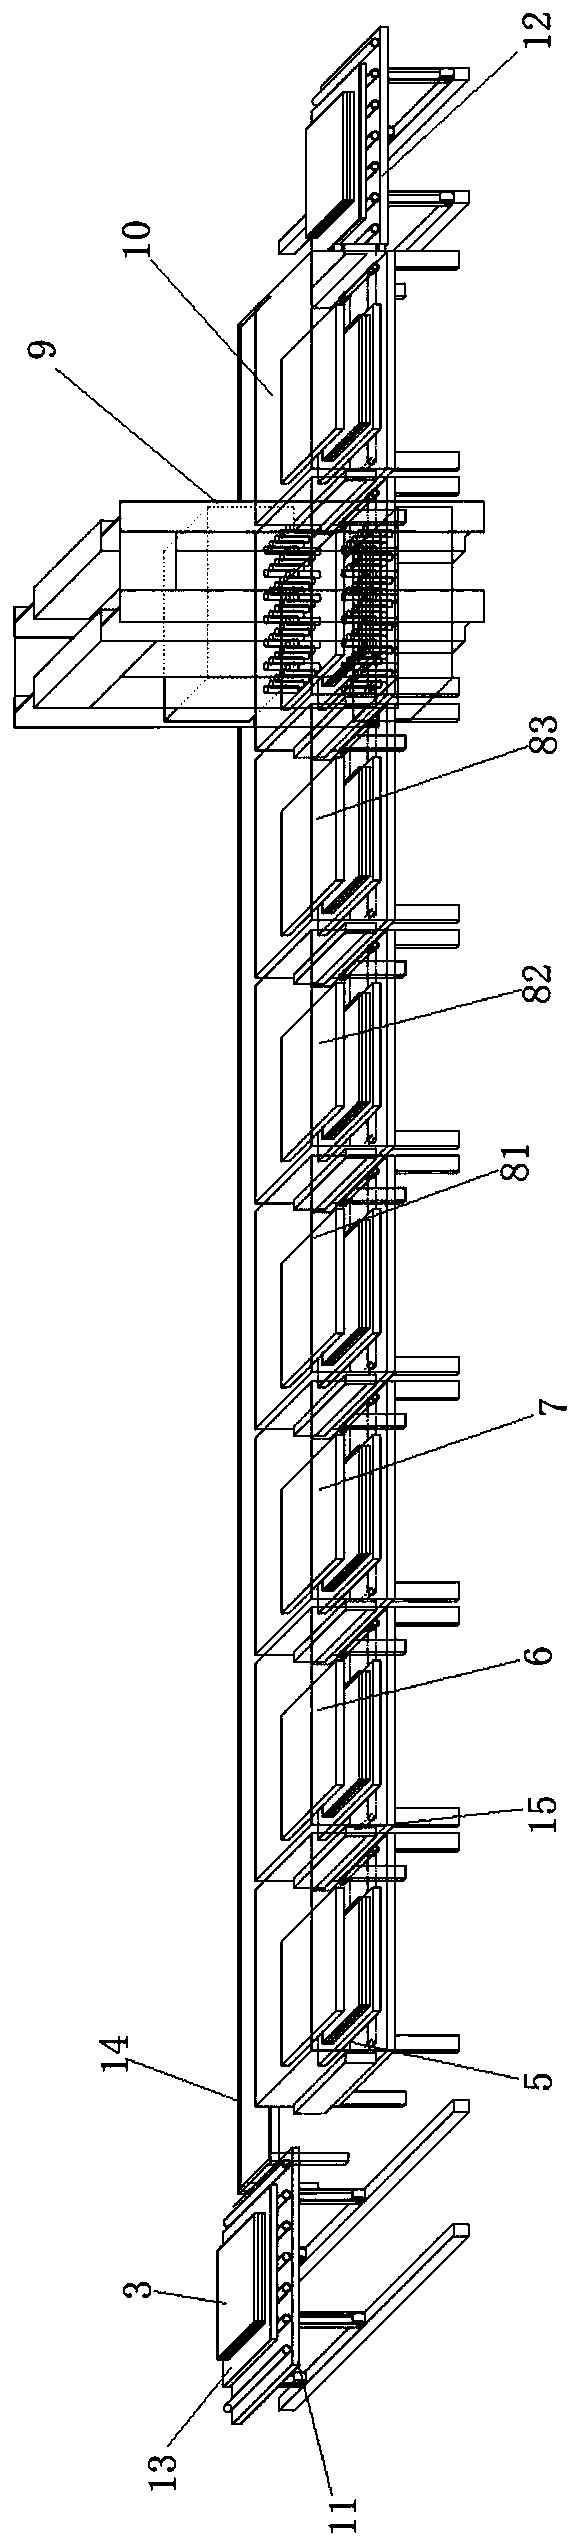 Sandwich glass hot-pressing method and device